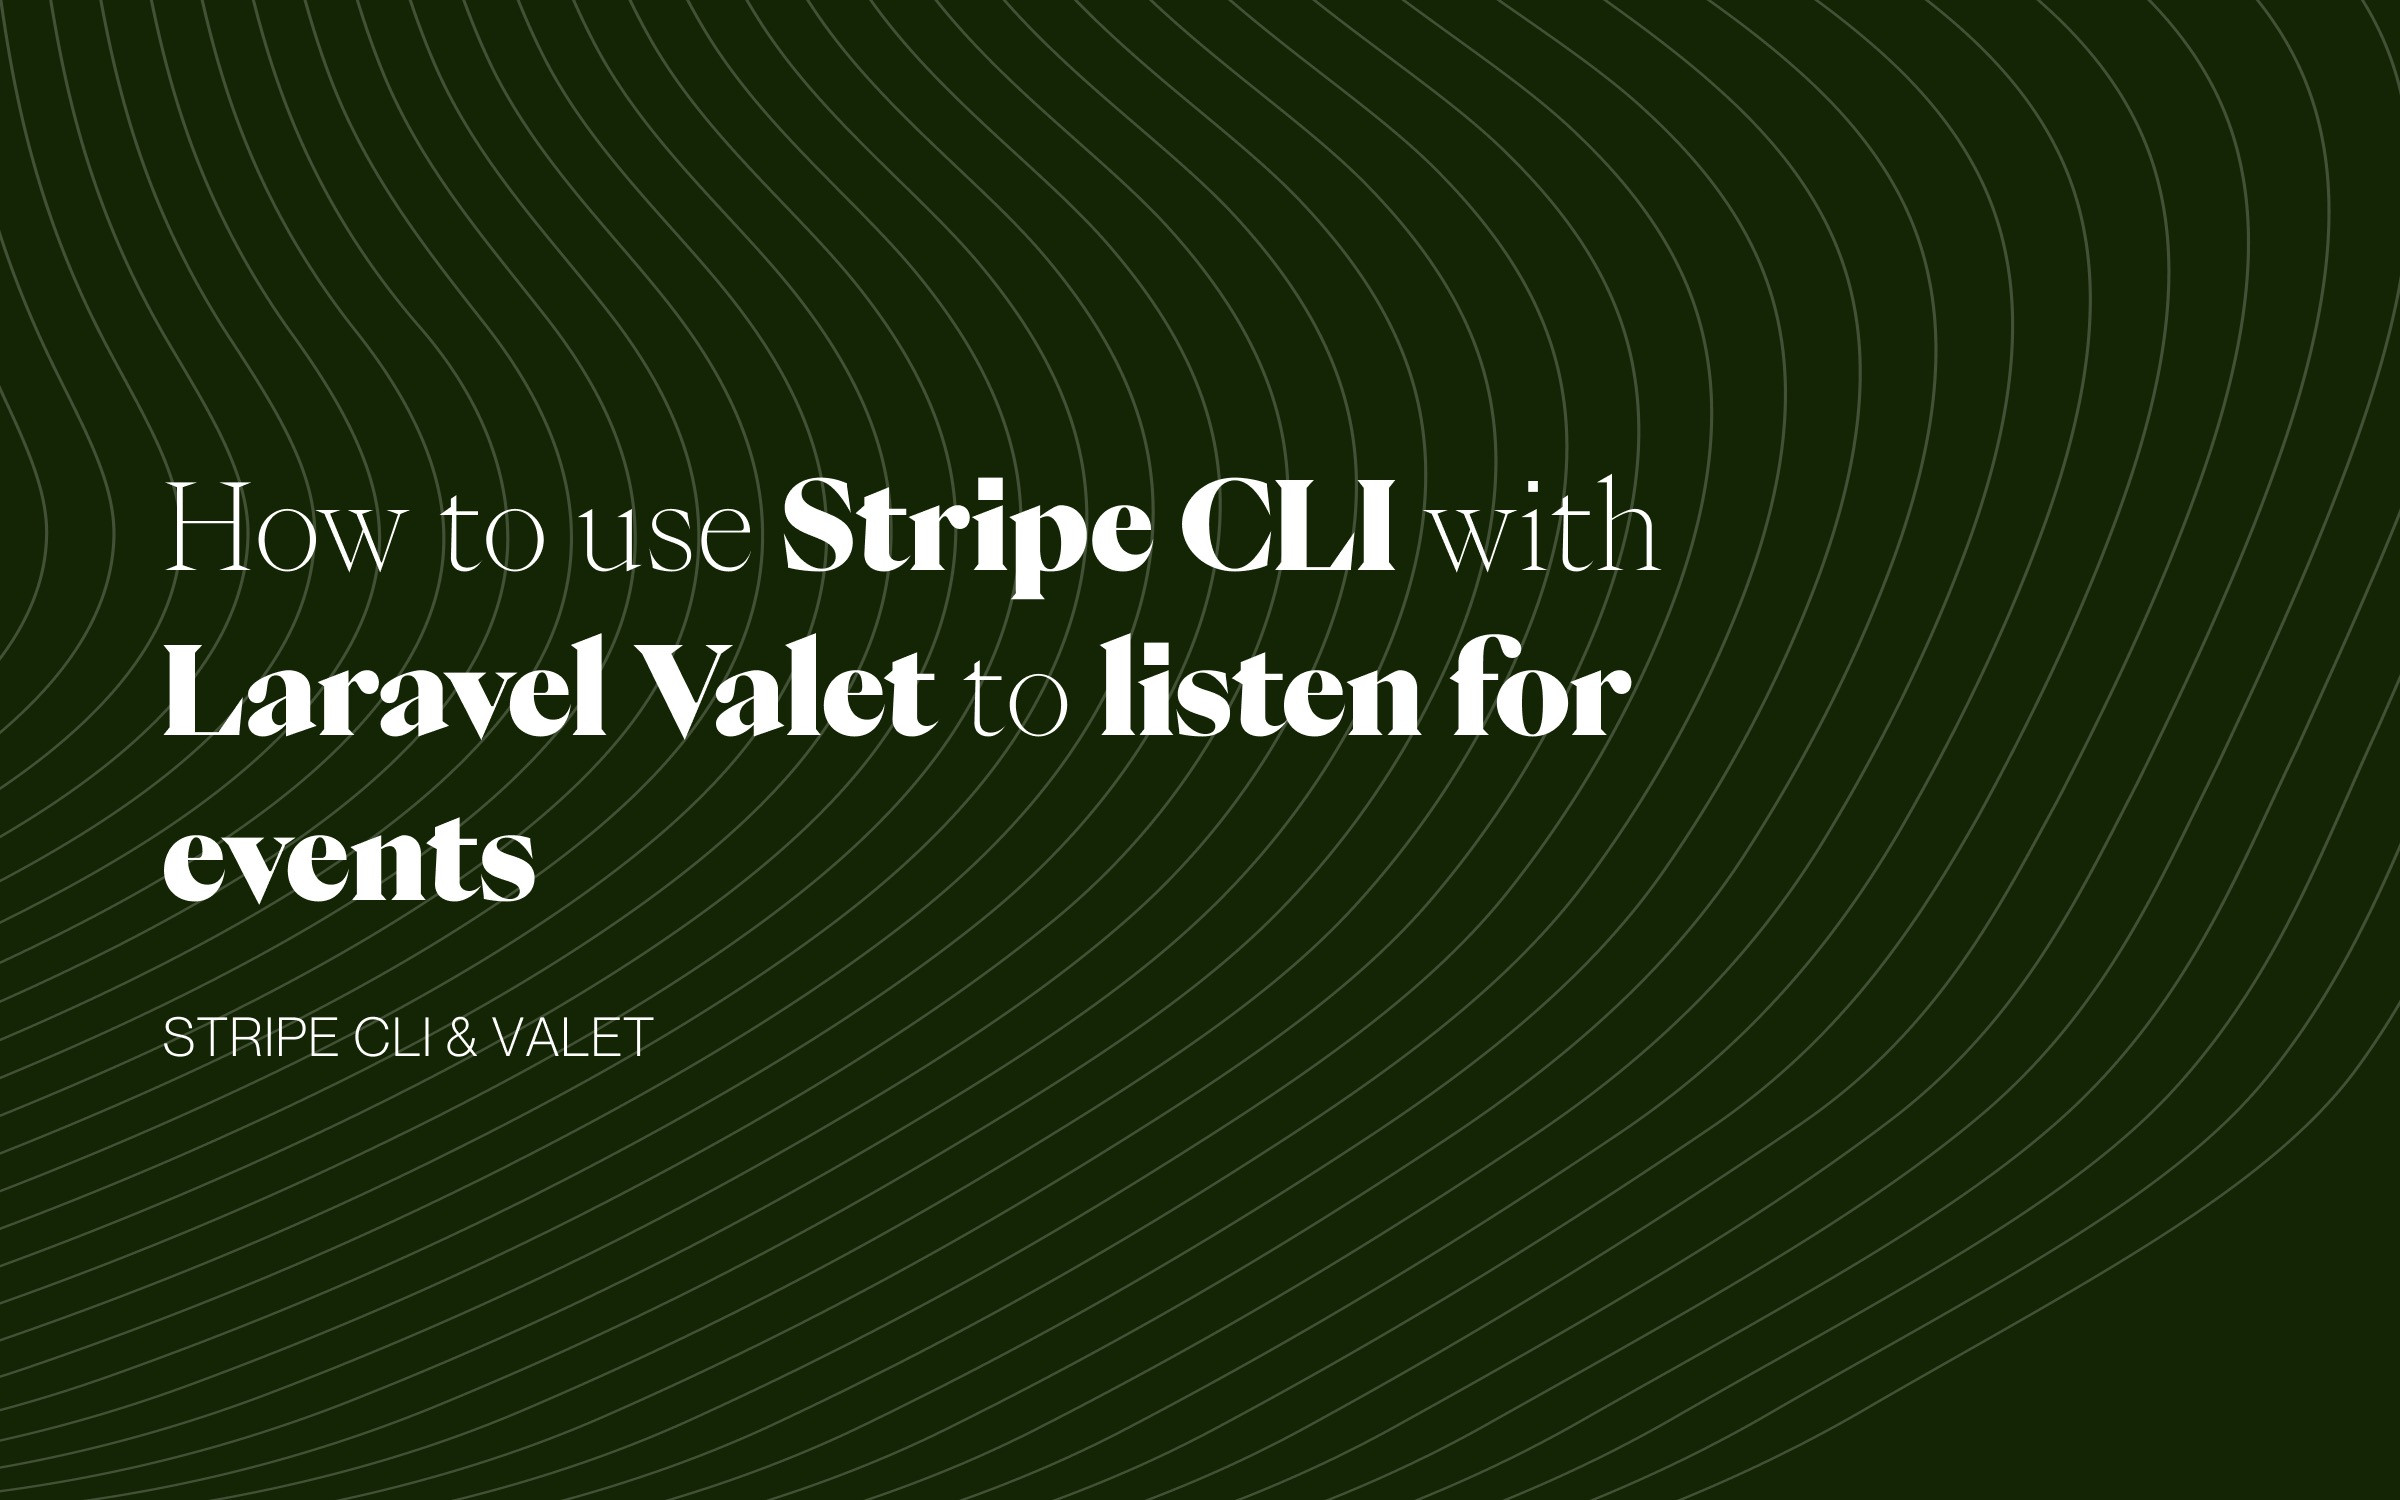 How to use Stripe CLI with Laravel Valet to listen for events